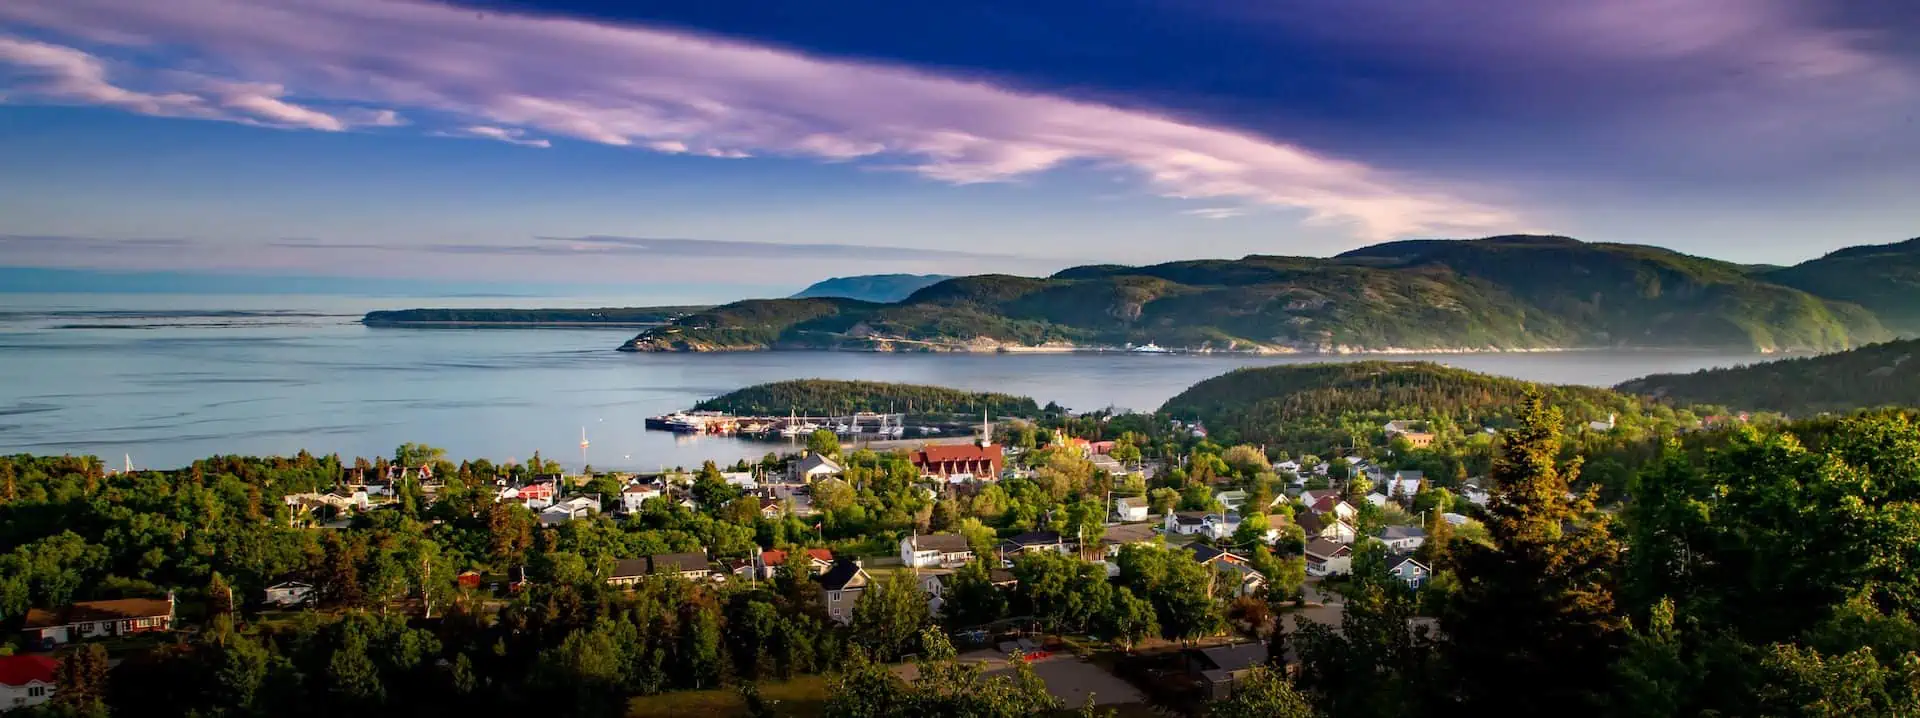 View over Tadoussac, Quebec, Canada with rolling hills, houses, green trees and water 